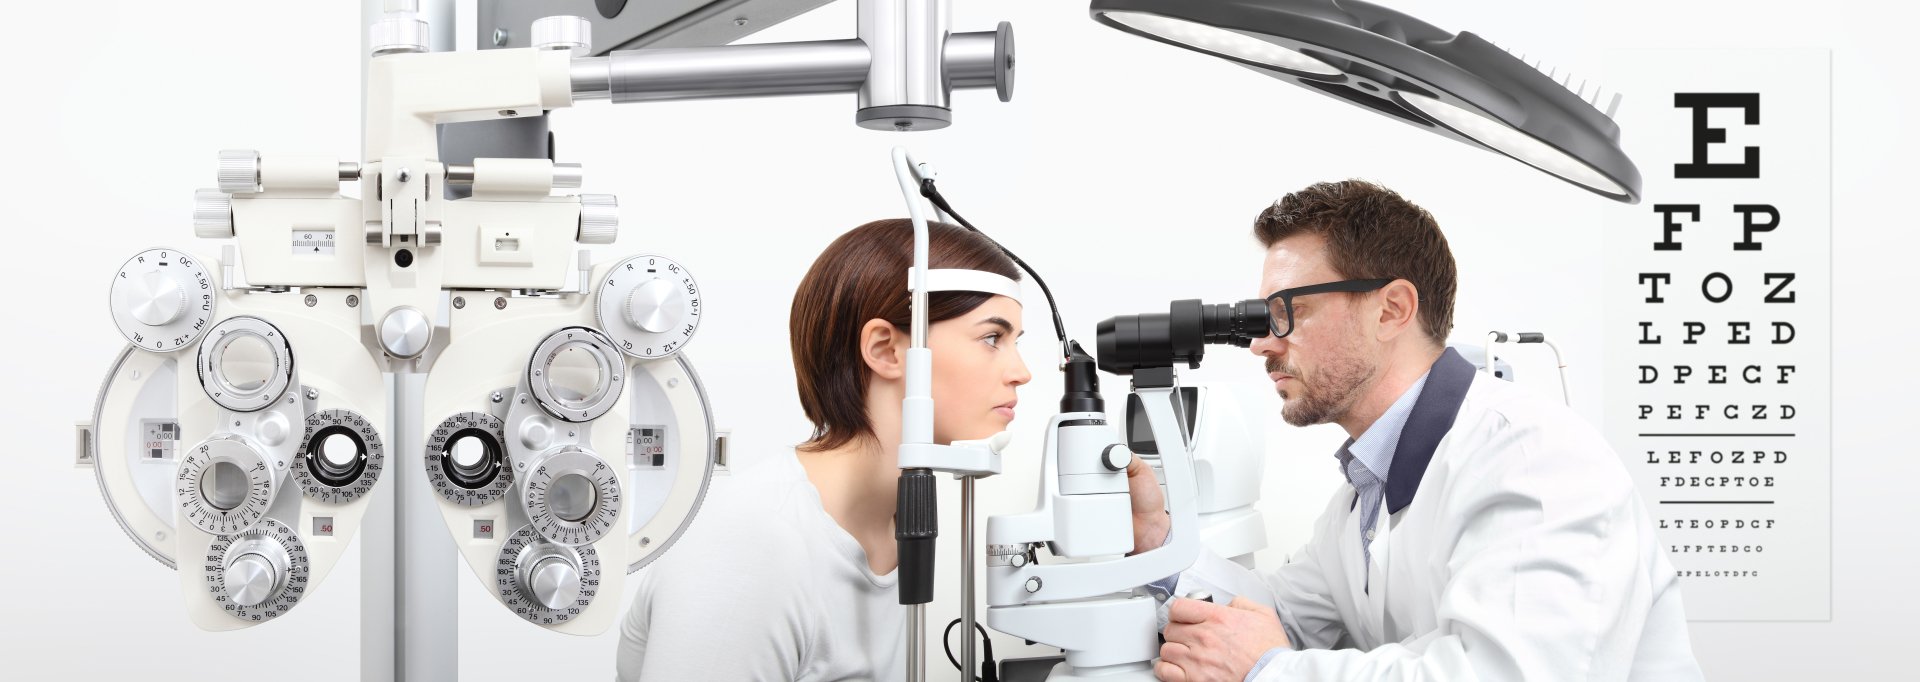 At Heritage Optometry our optometrists are committed to providing quality vision care and outstanding customer service.